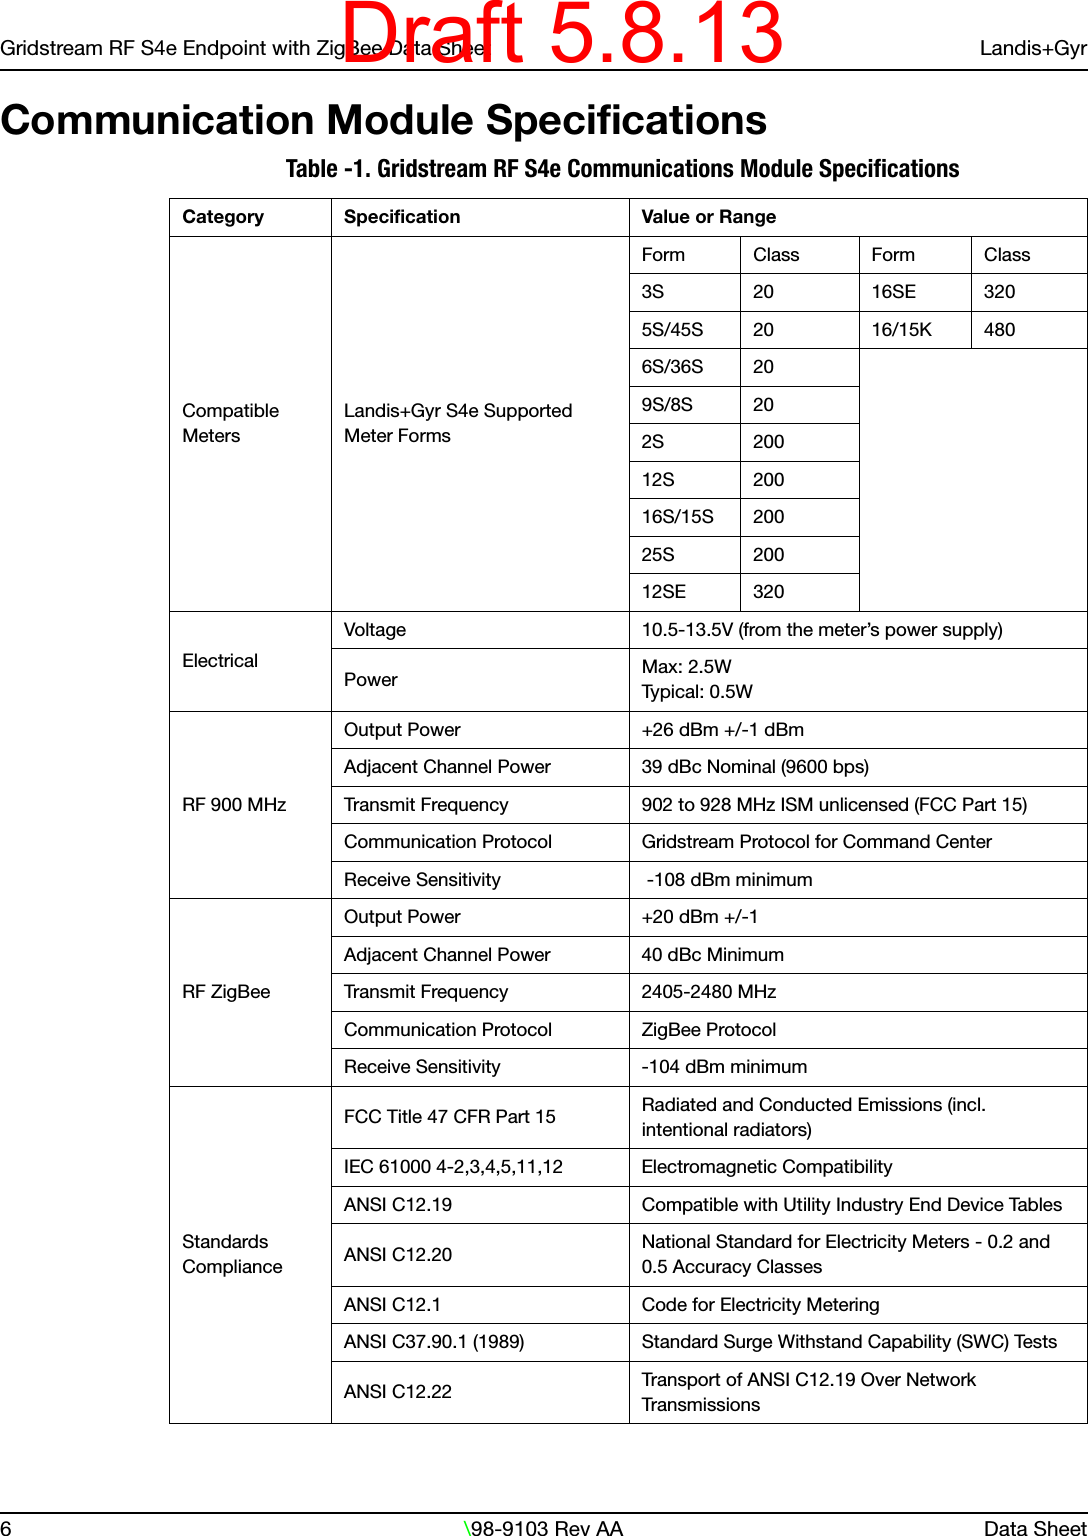 Gridstream RF S4e Endpoint with ZigBee Data Sheet Landis+Gyr6\98-9103 Rev AA Data SheetCommunication Module SpecificationsTable -1. Gridstream RF S4e Communications Module Specifications Category Specification Value or RangeCompatible MetersLandis+Gyr S4e Supported Meter FormsForm Class Form Class3S 20 16SE 3205S/45S 20 16/15K 4806S/36S 209S/8S 202S 20012S 20016S/15S 20025S 20012SE 320ElectricalVoltage 10.5-13.5V (from the meter’s power supply)Power Max: 2.5WTypic a l :  0 .5 WRF 900 MHzOutput Power +26 dBm +/-1 dBmAdjacent Channel Power 39 dBc Nominal (9600 bps)Transmit Frequency 902 to 928 MHz ISM unlicensed (FCC Part 15)Communication Protocol Gridstream Protocol for Command CenterReceive Sensitivity  -108 dBm minimumRF ZigBeeOutput Power +20 dBm +/-1Adjacent Channel Power 40 dBc MinimumTransmit Frequency 2405-2480 MHzCommunication Protocol ZigBee ProtocolReceive Sensitivity -104 dBm minimumStandards ComplianceFCC Title 47 CFR Part 15 Radiated and Conducted Emissions (incl. intentional radiators)IEC 61000 4-2,3,4,5,11,12 Electromagnetic CompatibilityANSI C12.19 Compatible with Utility Industry End Device TablesANSI C12.20 National Standard for Electricity Meters - 0.2 and 0.5 Accuracy ClassesANSI C12.1 Code for Electricity Metering ANSI C37.90.1 (1989) Standard Surge Withstand Capability (SWC) TestsANSI C12.22 Transport of ANSI C12.19 Over Network TransmissionsDraft 5.8.13